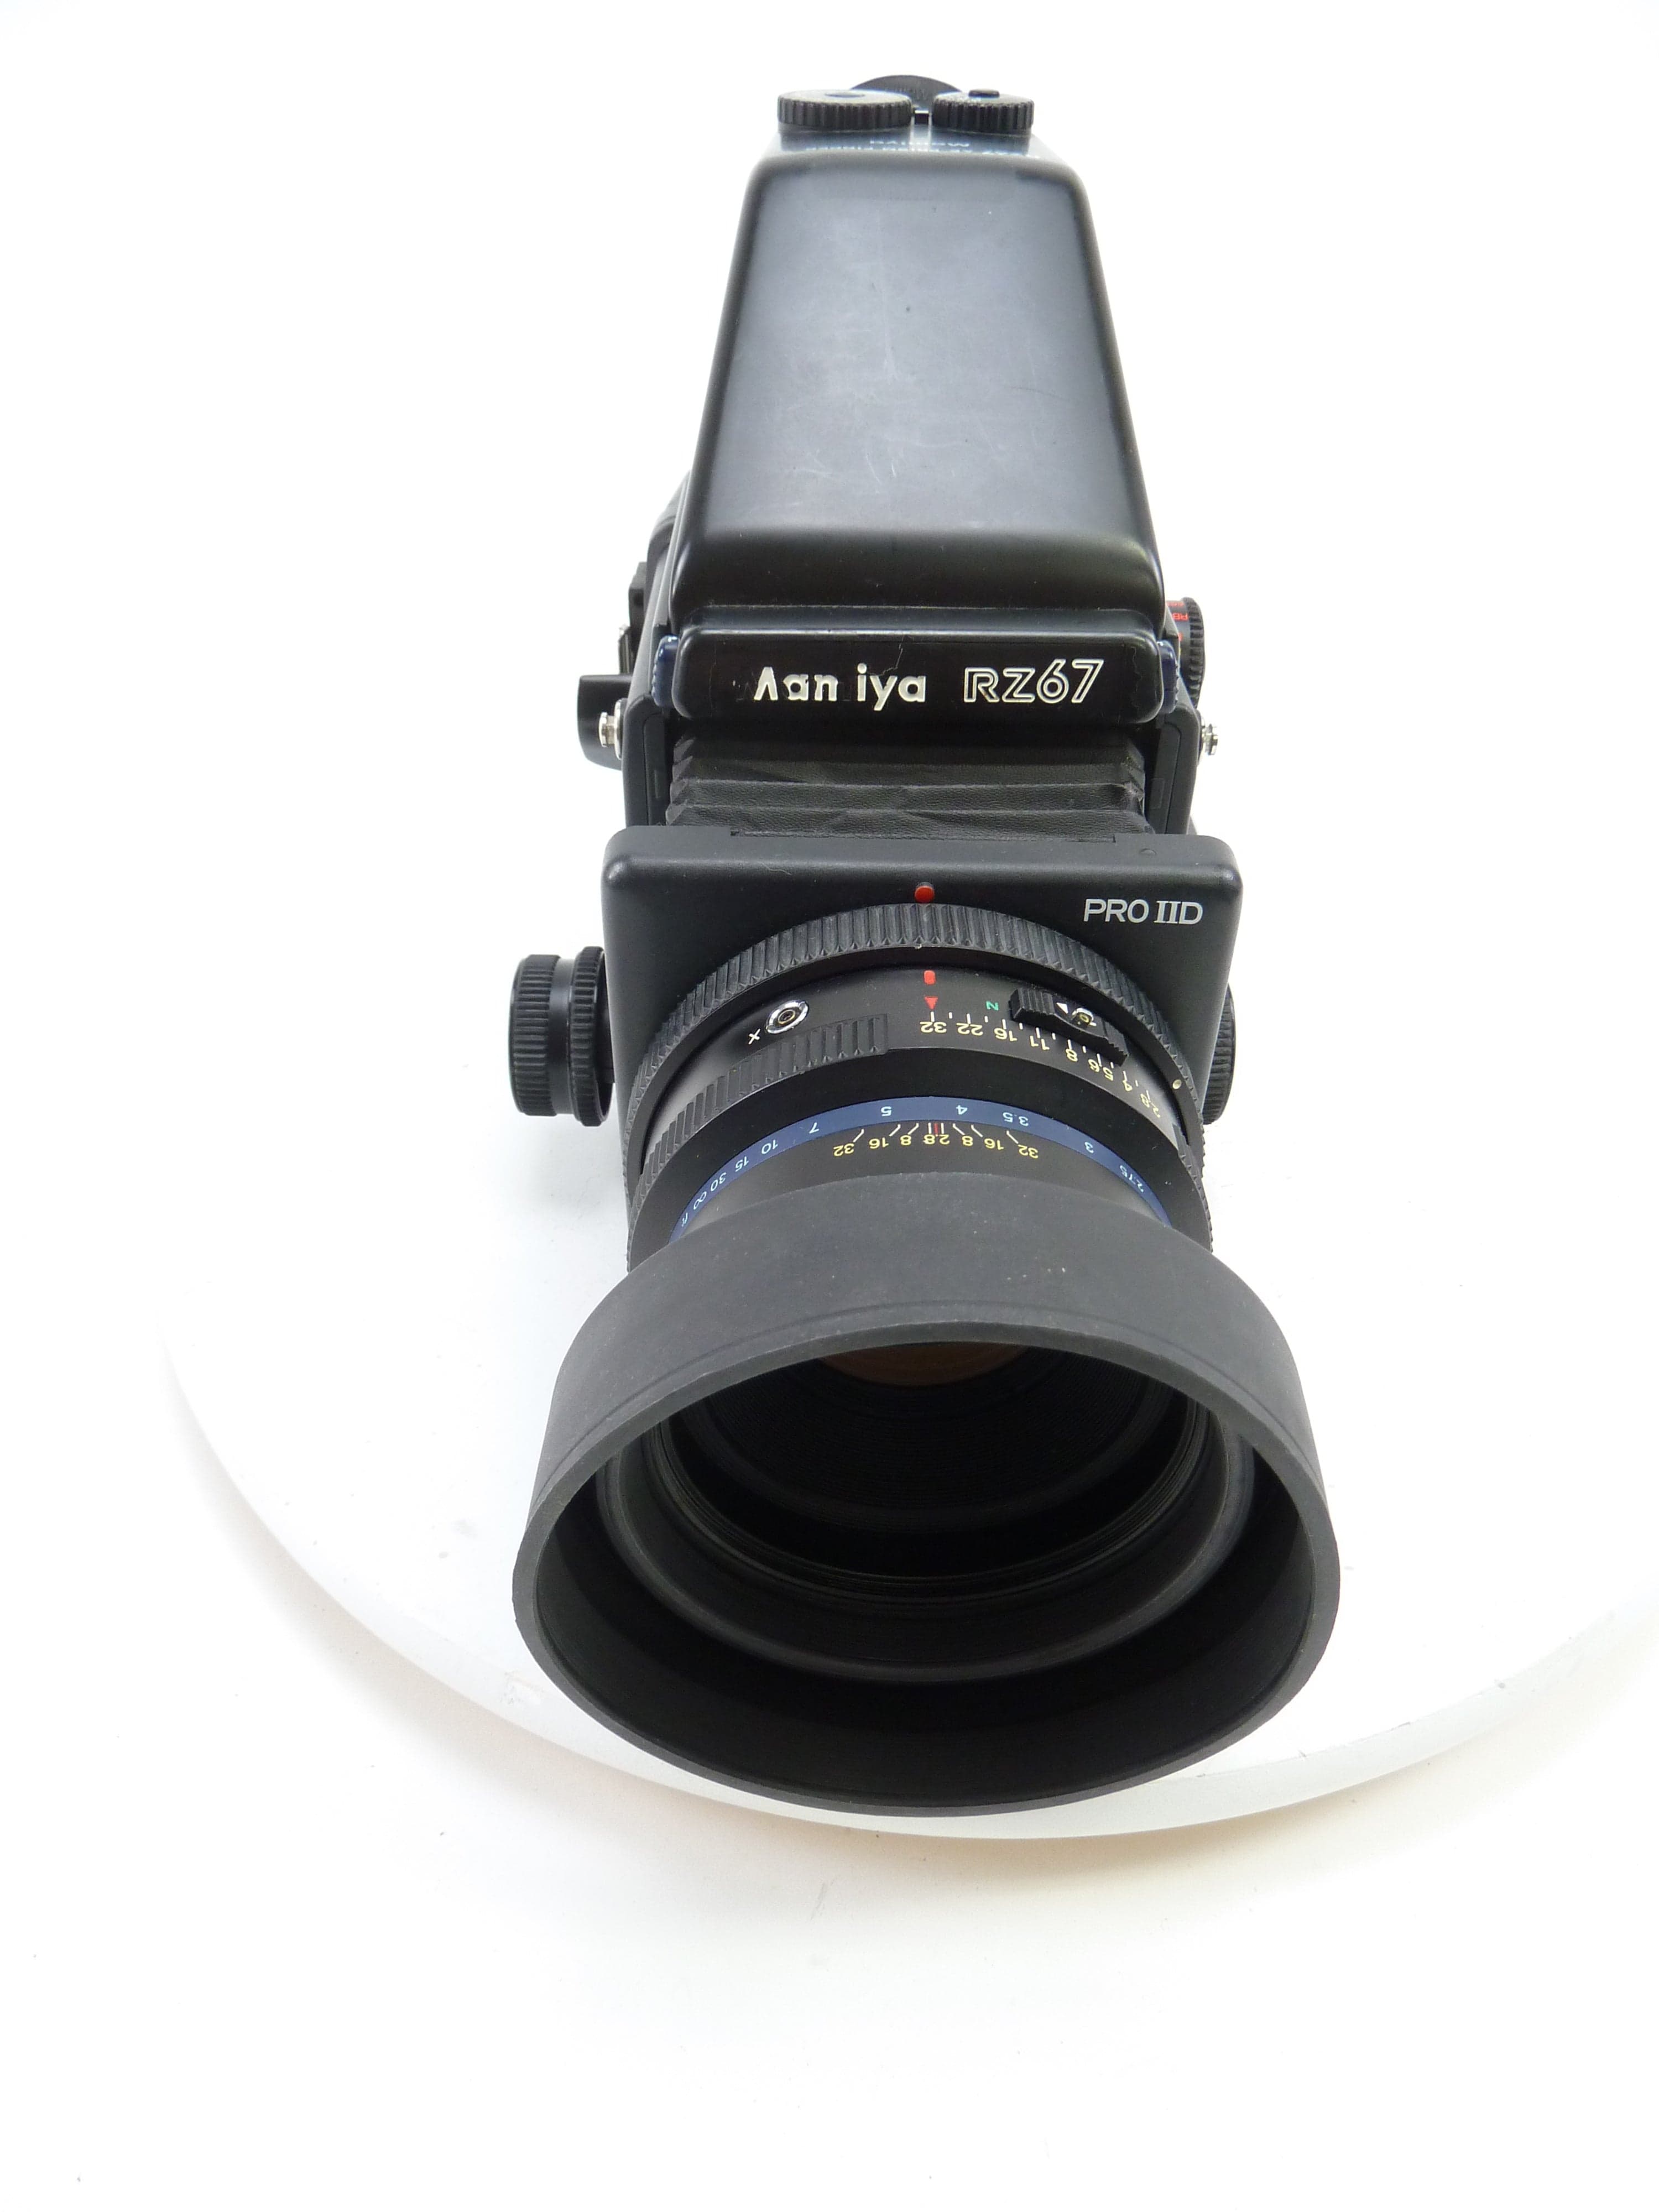 Mamiya RZ67 Pro IID Camera Outfit with the Pro II AE Prism and